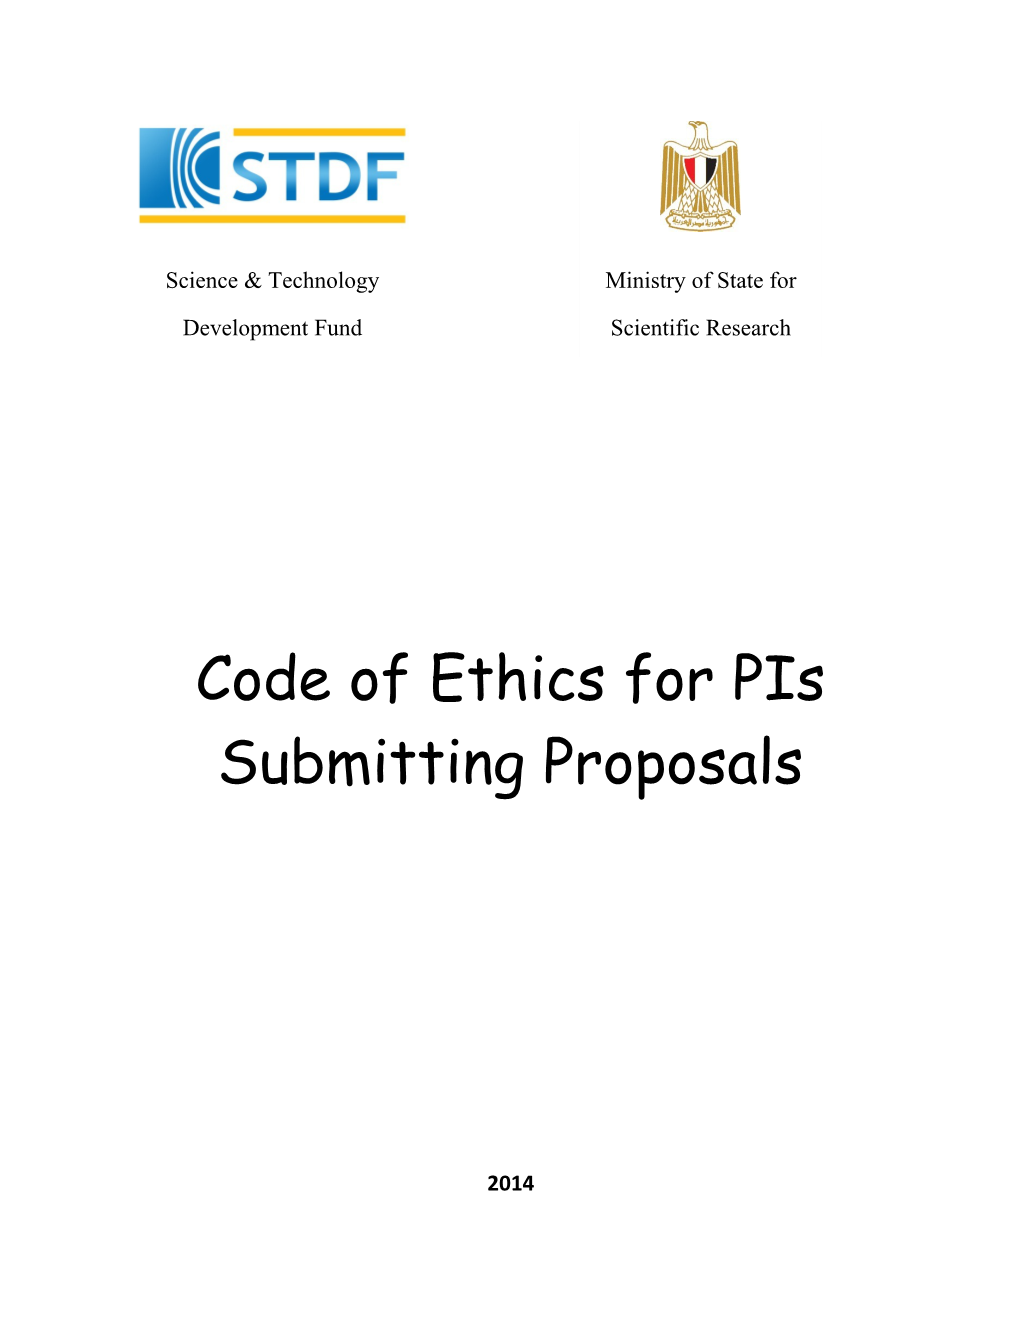 Code of Ethics for Pis Submitting Proposals